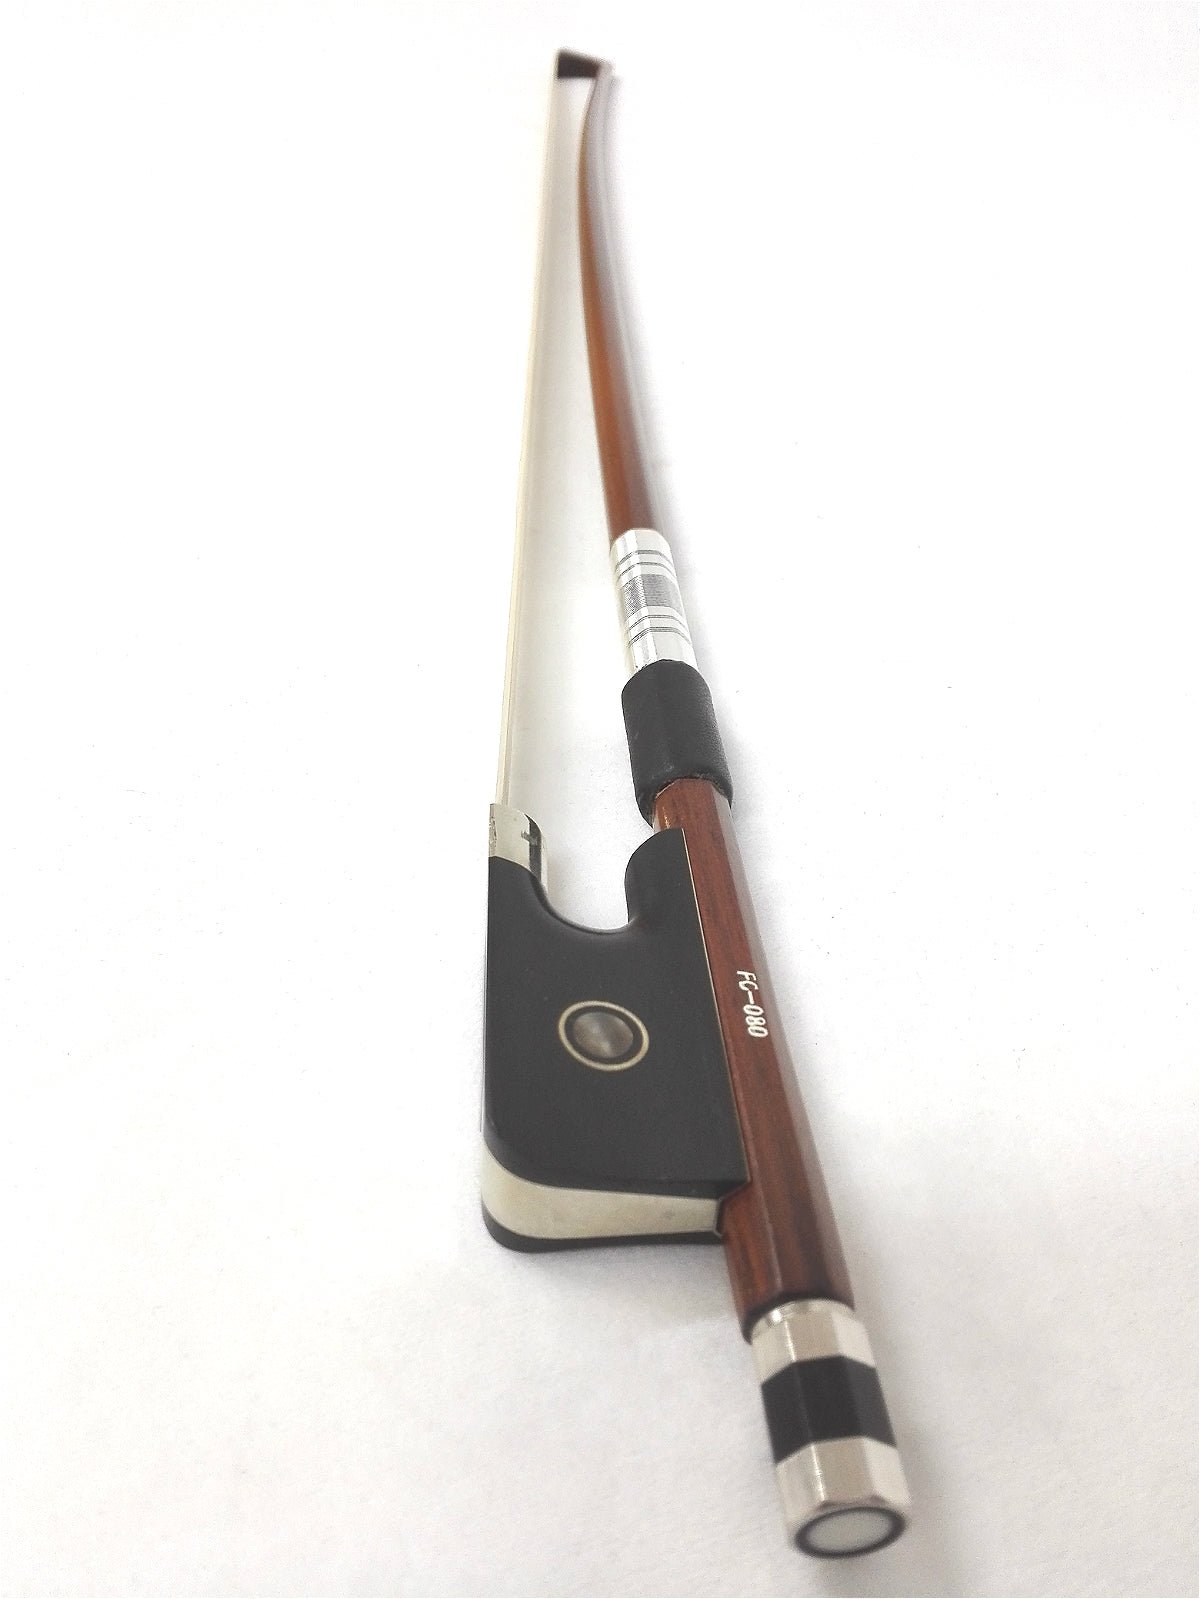 Symphony FC080 1/4 Size Cello Bow, Brazil-wood, Round Stick, Real Horse Hair